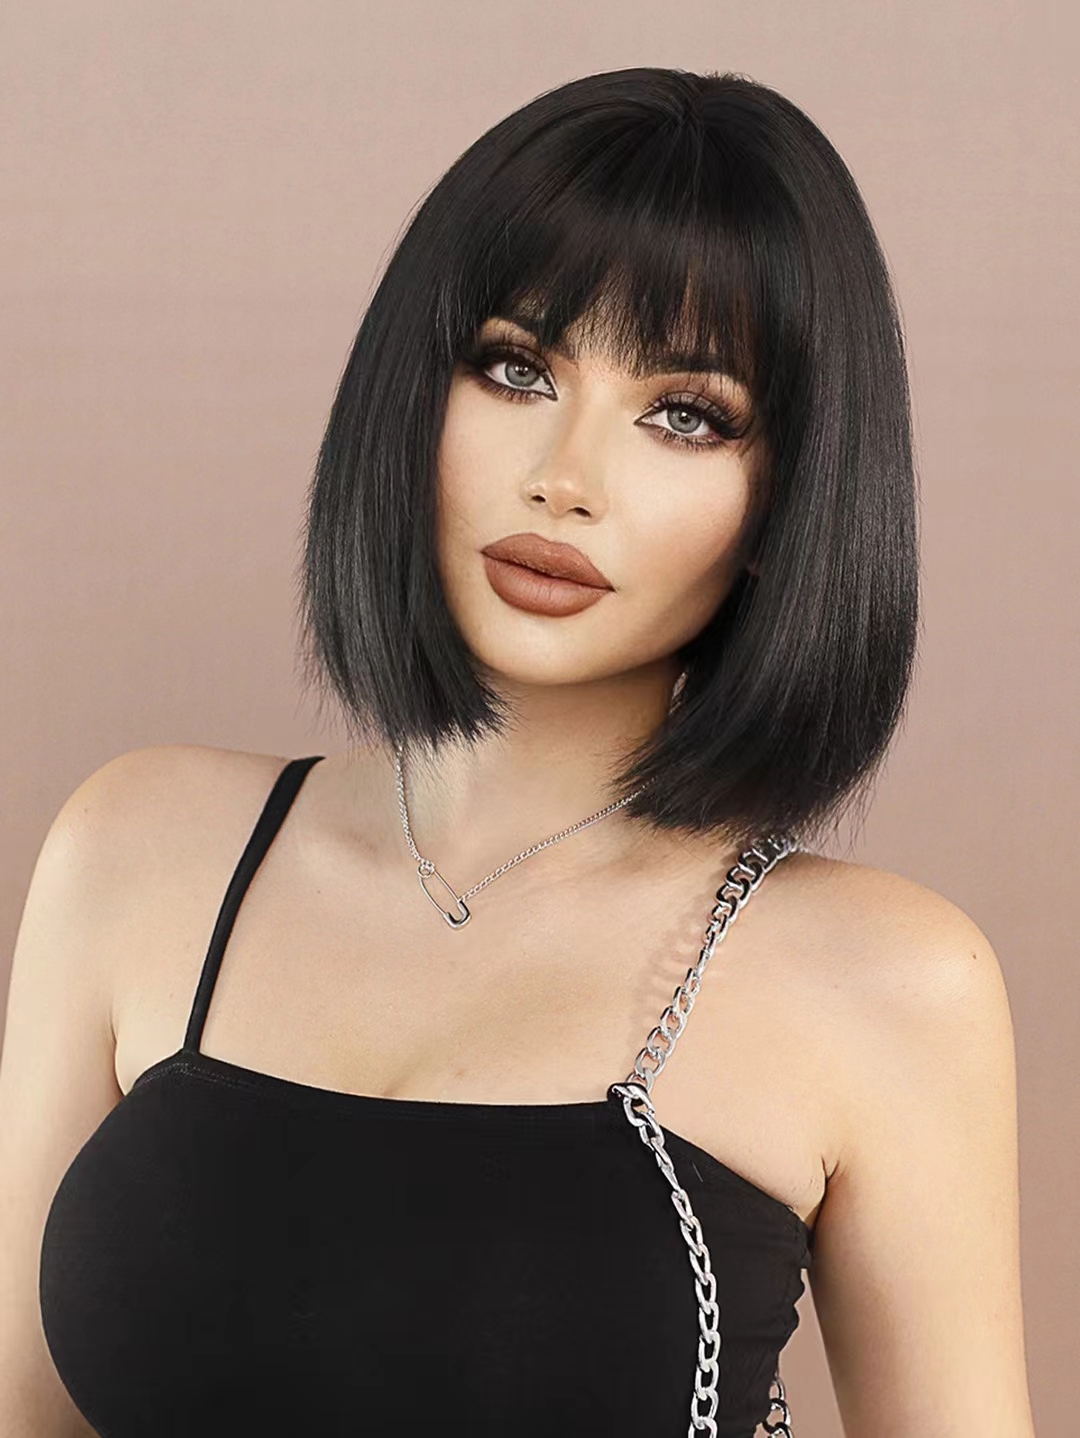 Fashionable synthetic wig in YAKI black bob style, with short straight hair and bangs, ready to go